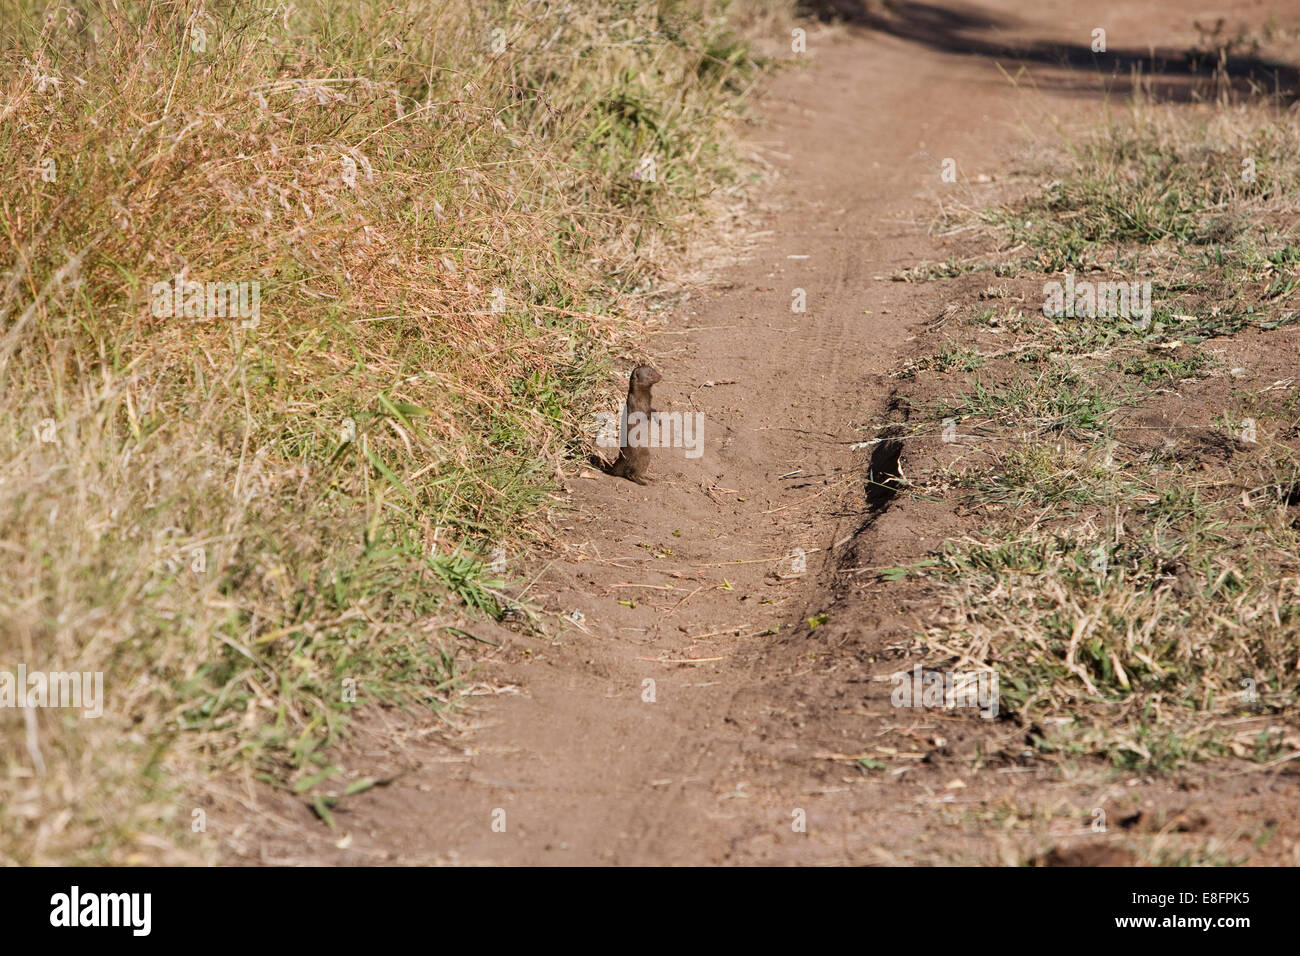 South Africa, Mongoose standing on dirt road Stock Photo